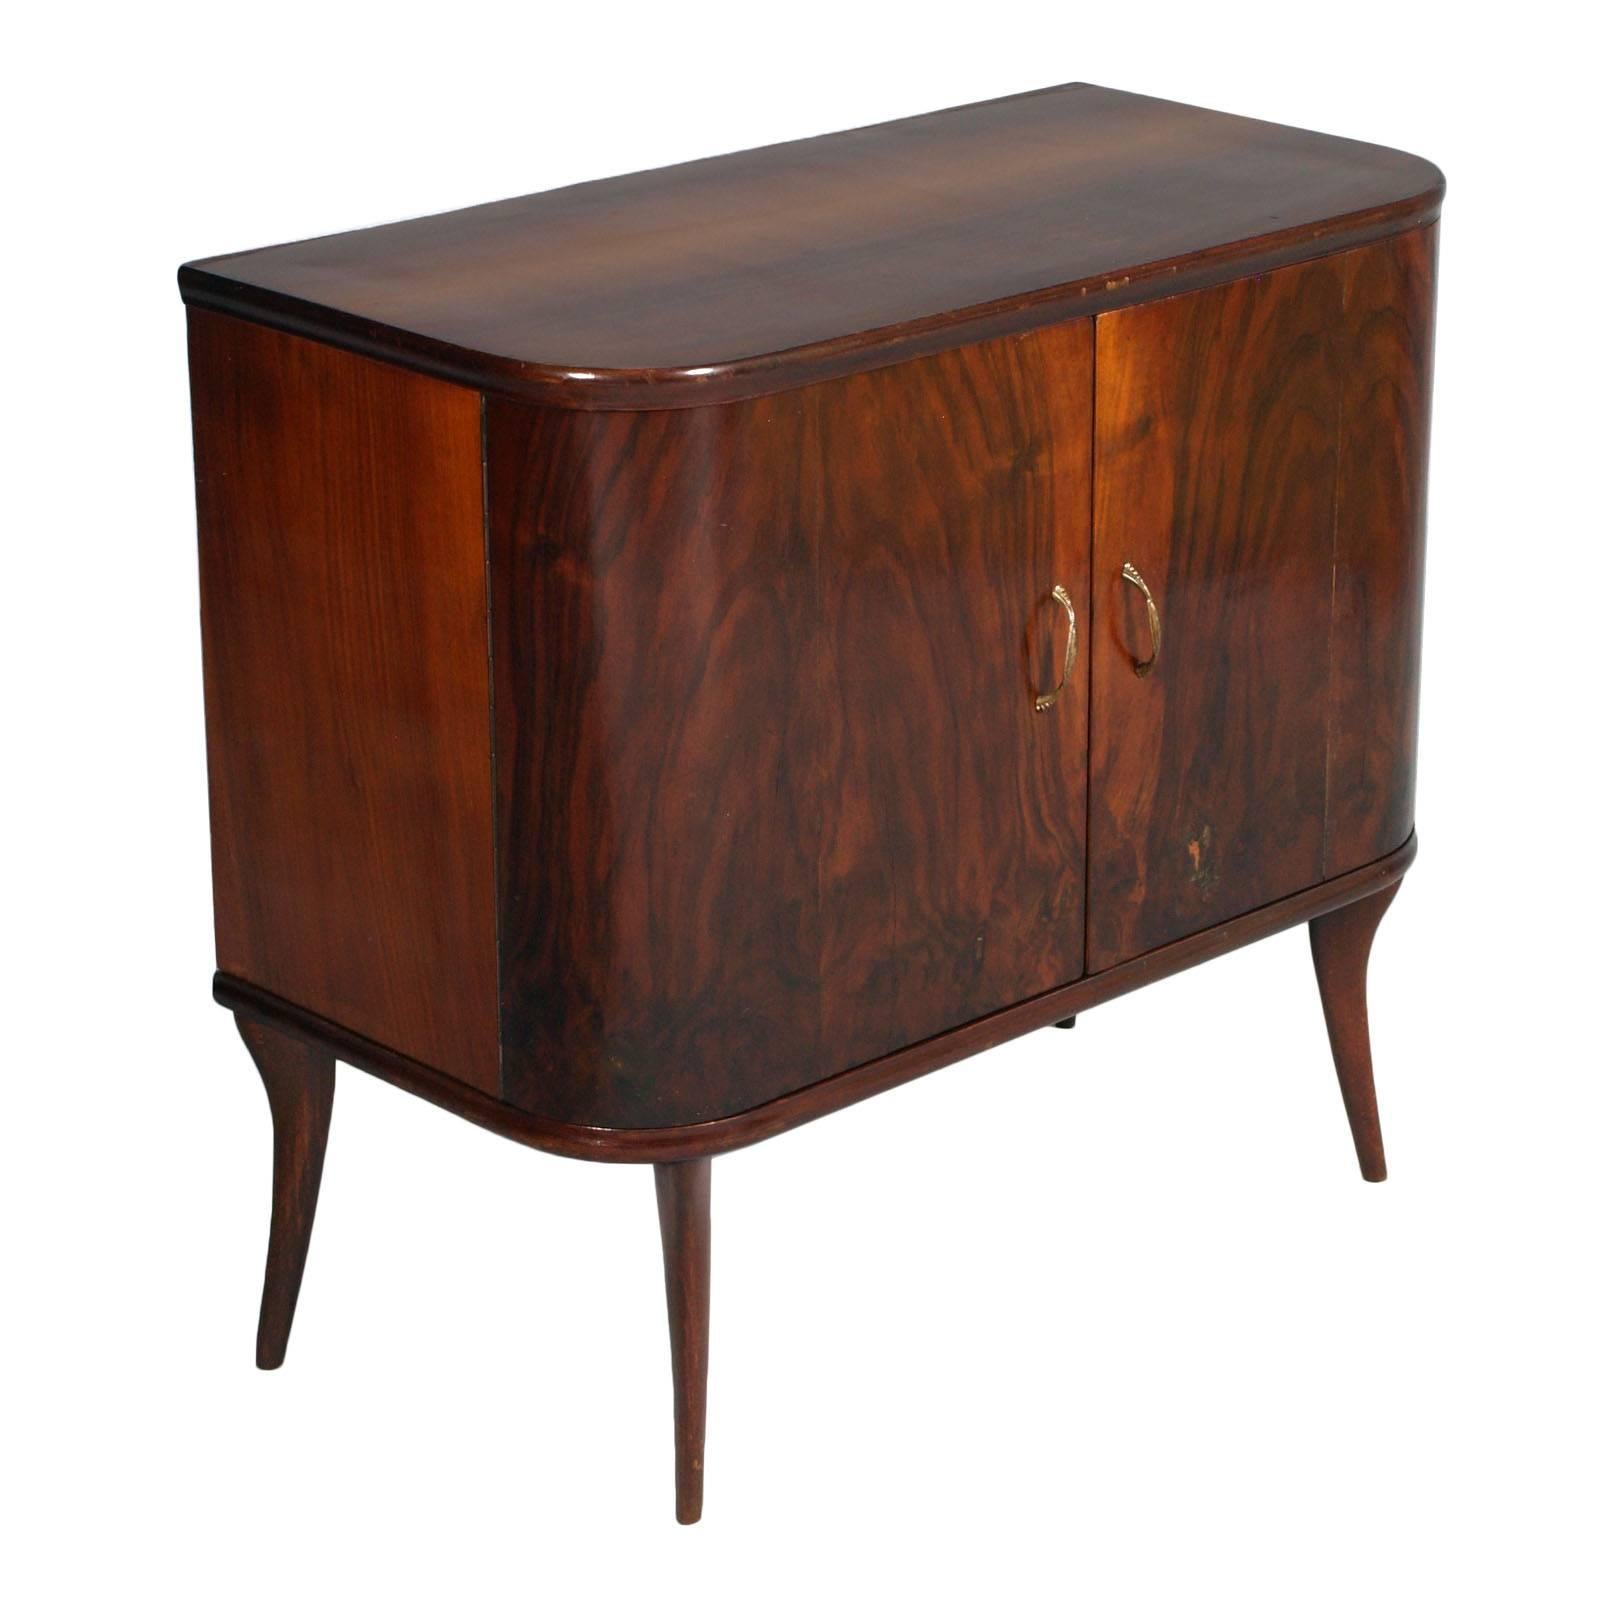 Italian Cantu Sideboard Cabinet Mid-Century modern in walnut and walnut veneered, Vittorio Dassi attributed restored and polished to wax. Mahogany interior, handles in golden brass.
Measures cm: H 76, W 82, D 42 (H 22cm internal shelves).